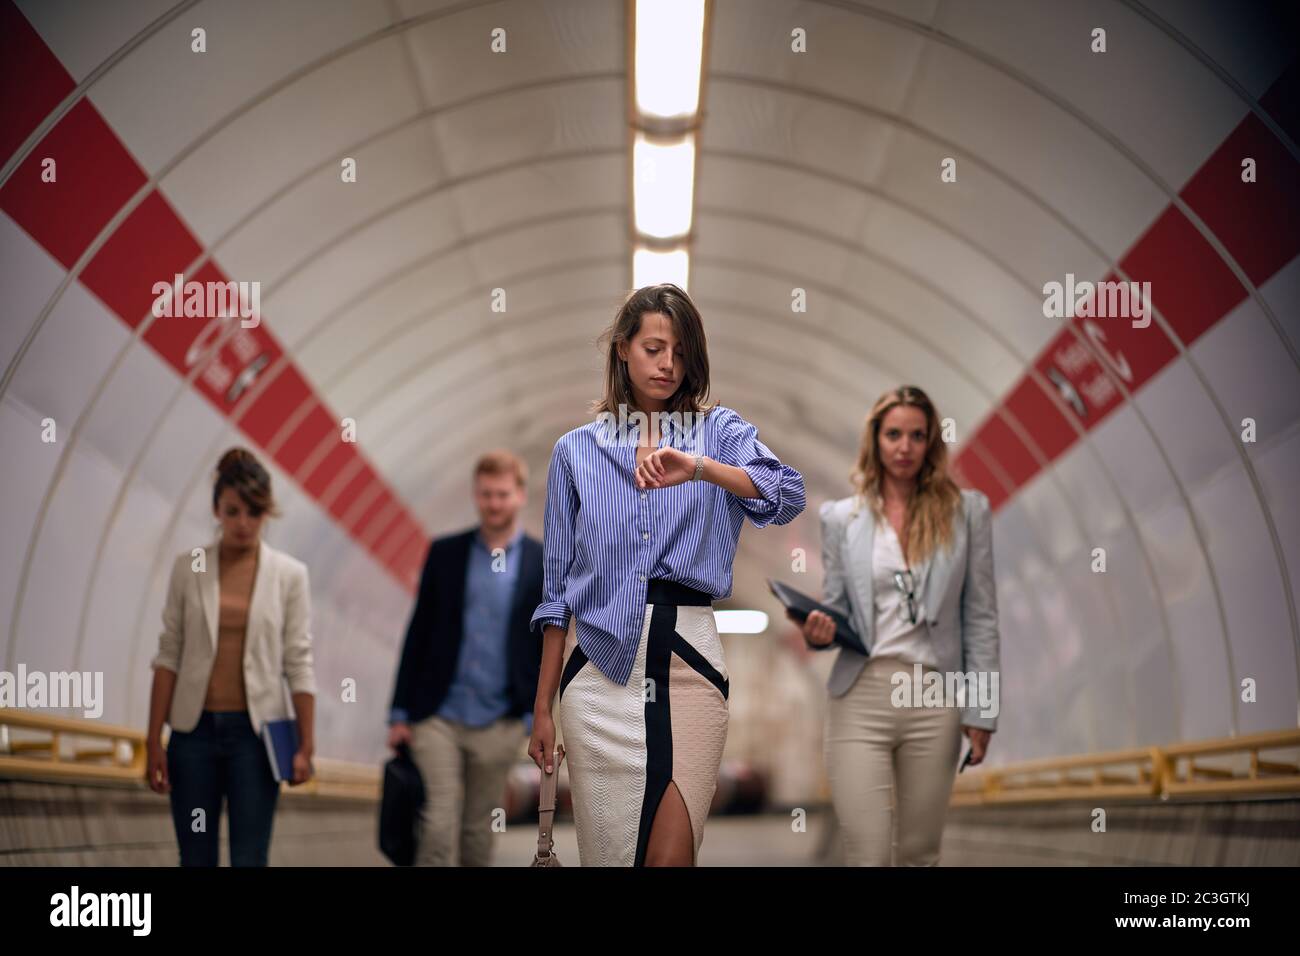 Modern business people walking to platform at train station.Urban lifestyle and transportation concepts. Stock Photo